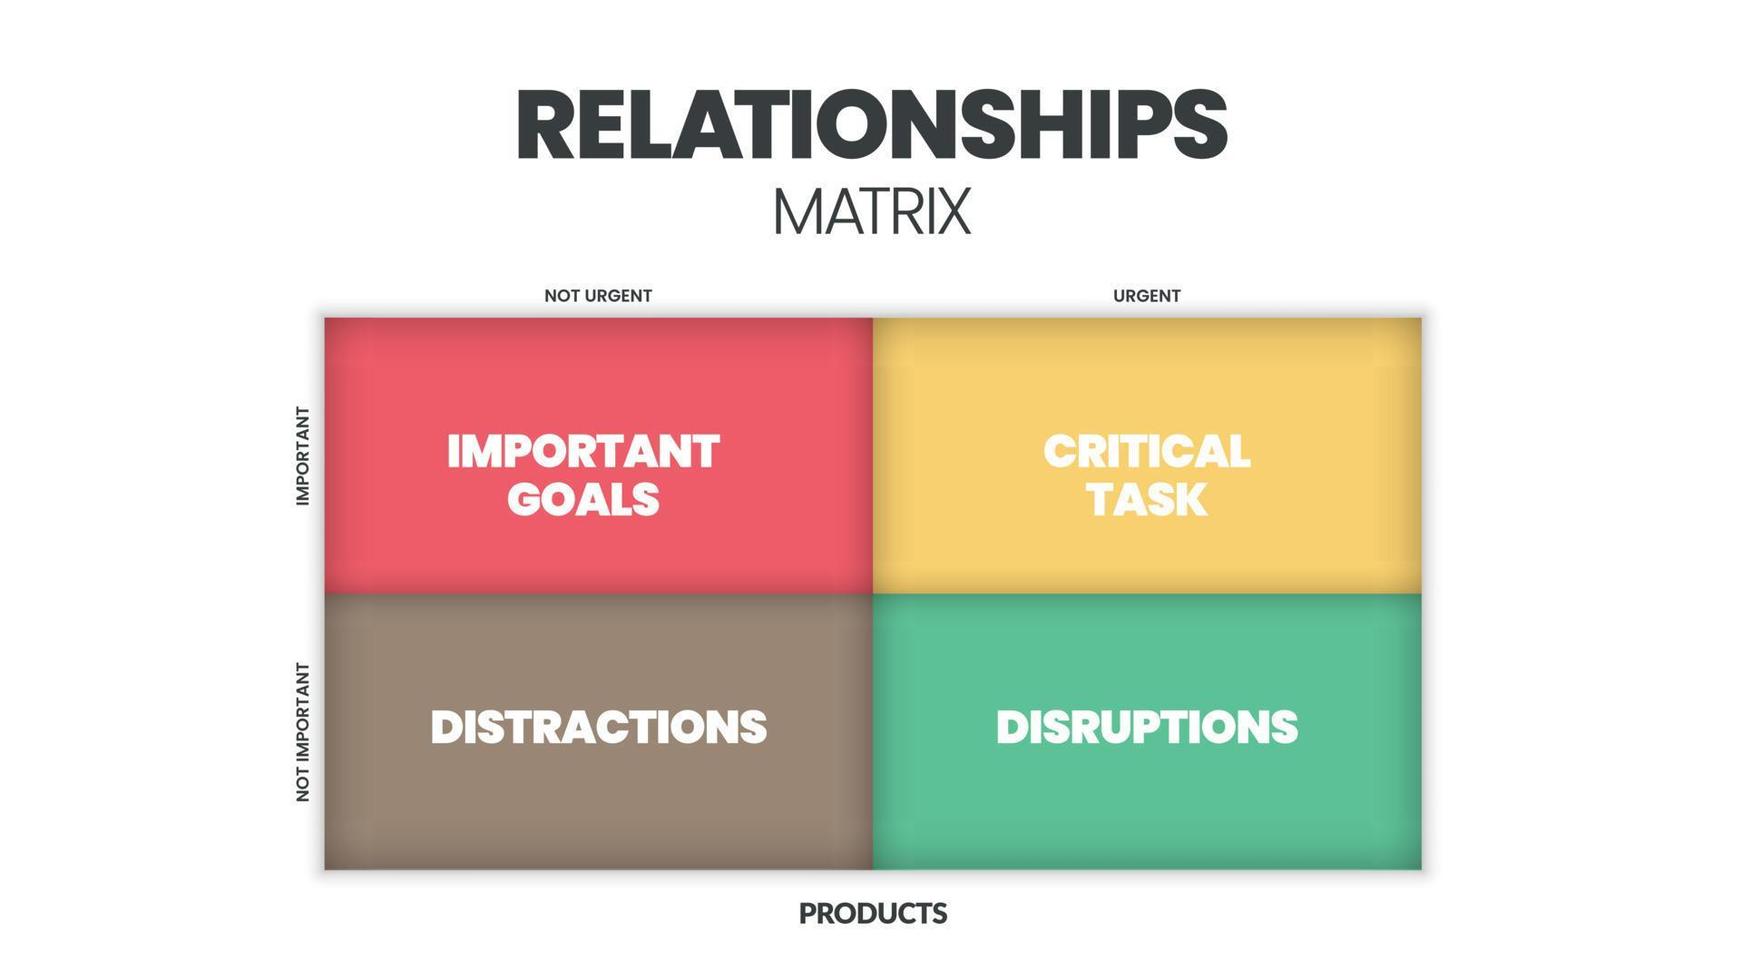 Relationships matrix infographic presentation is vector illustration in four elements such as important goals, critical task, distractions and disruptions. Business banner for slide or marketing web.